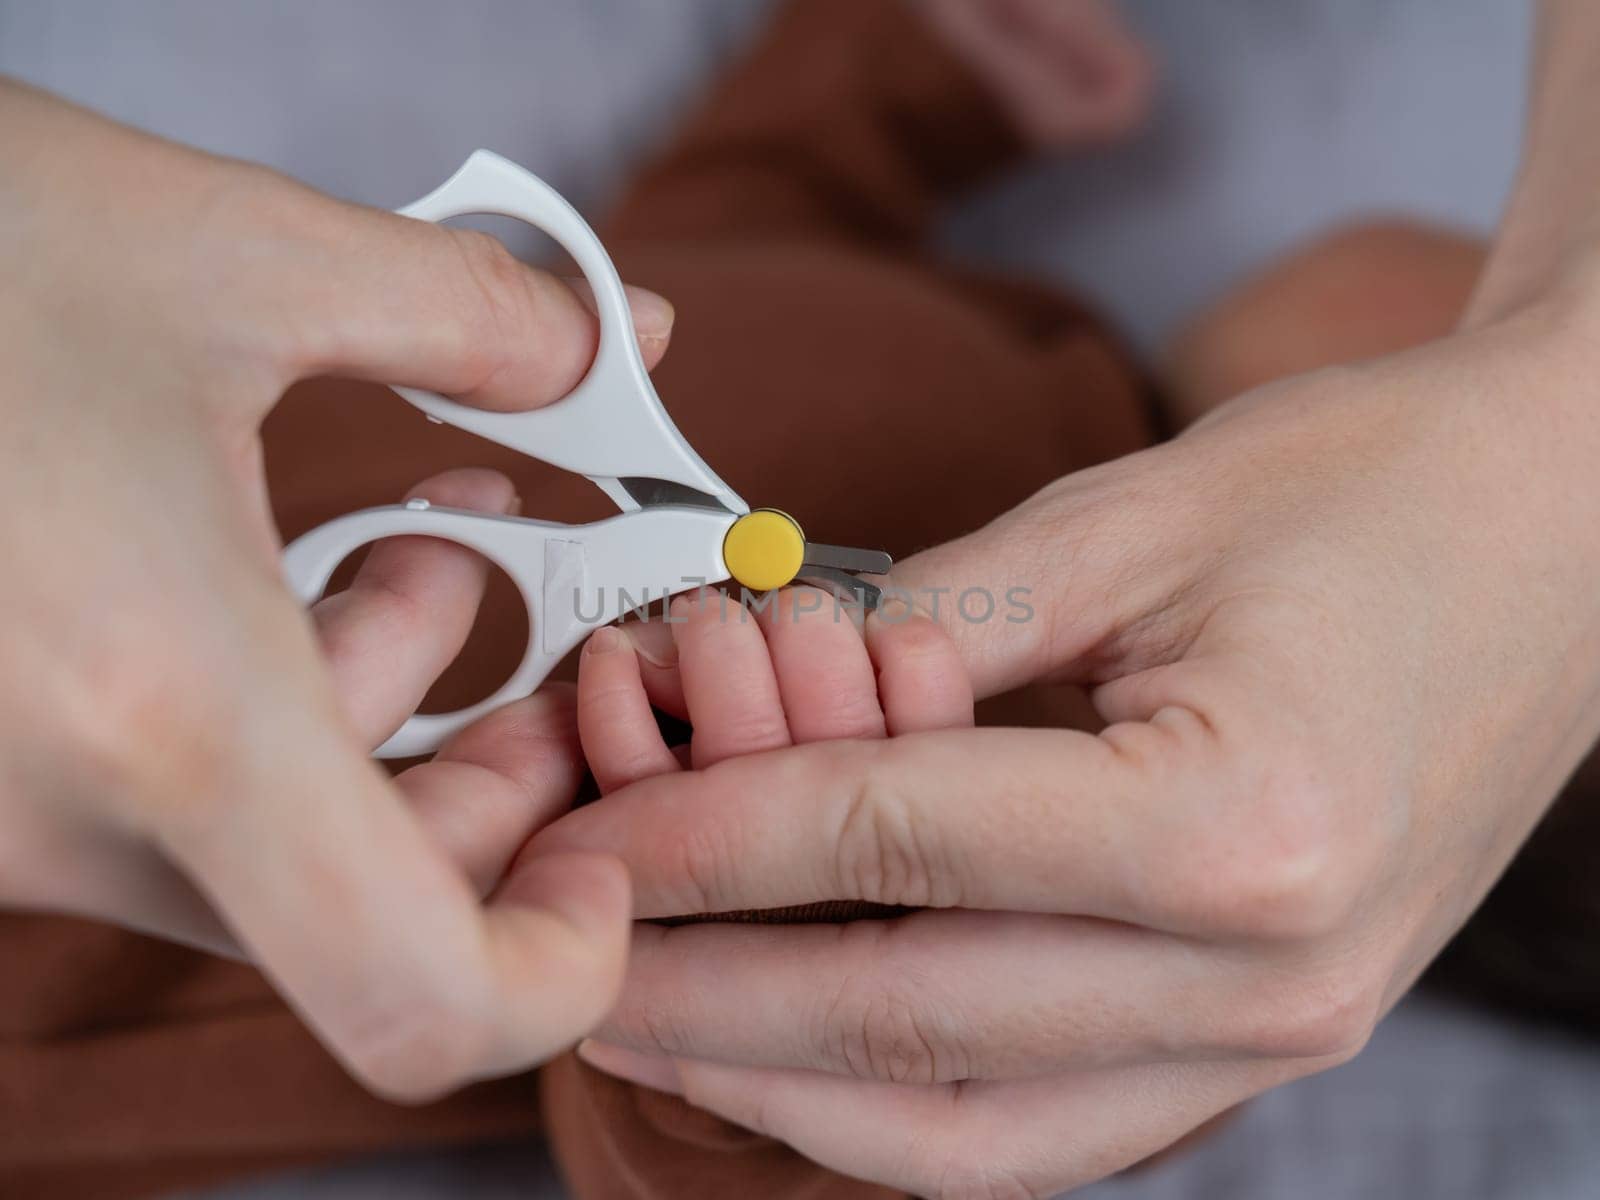 Mom cuts her newborn son's fingernails with small children's scissors. by mrwed54